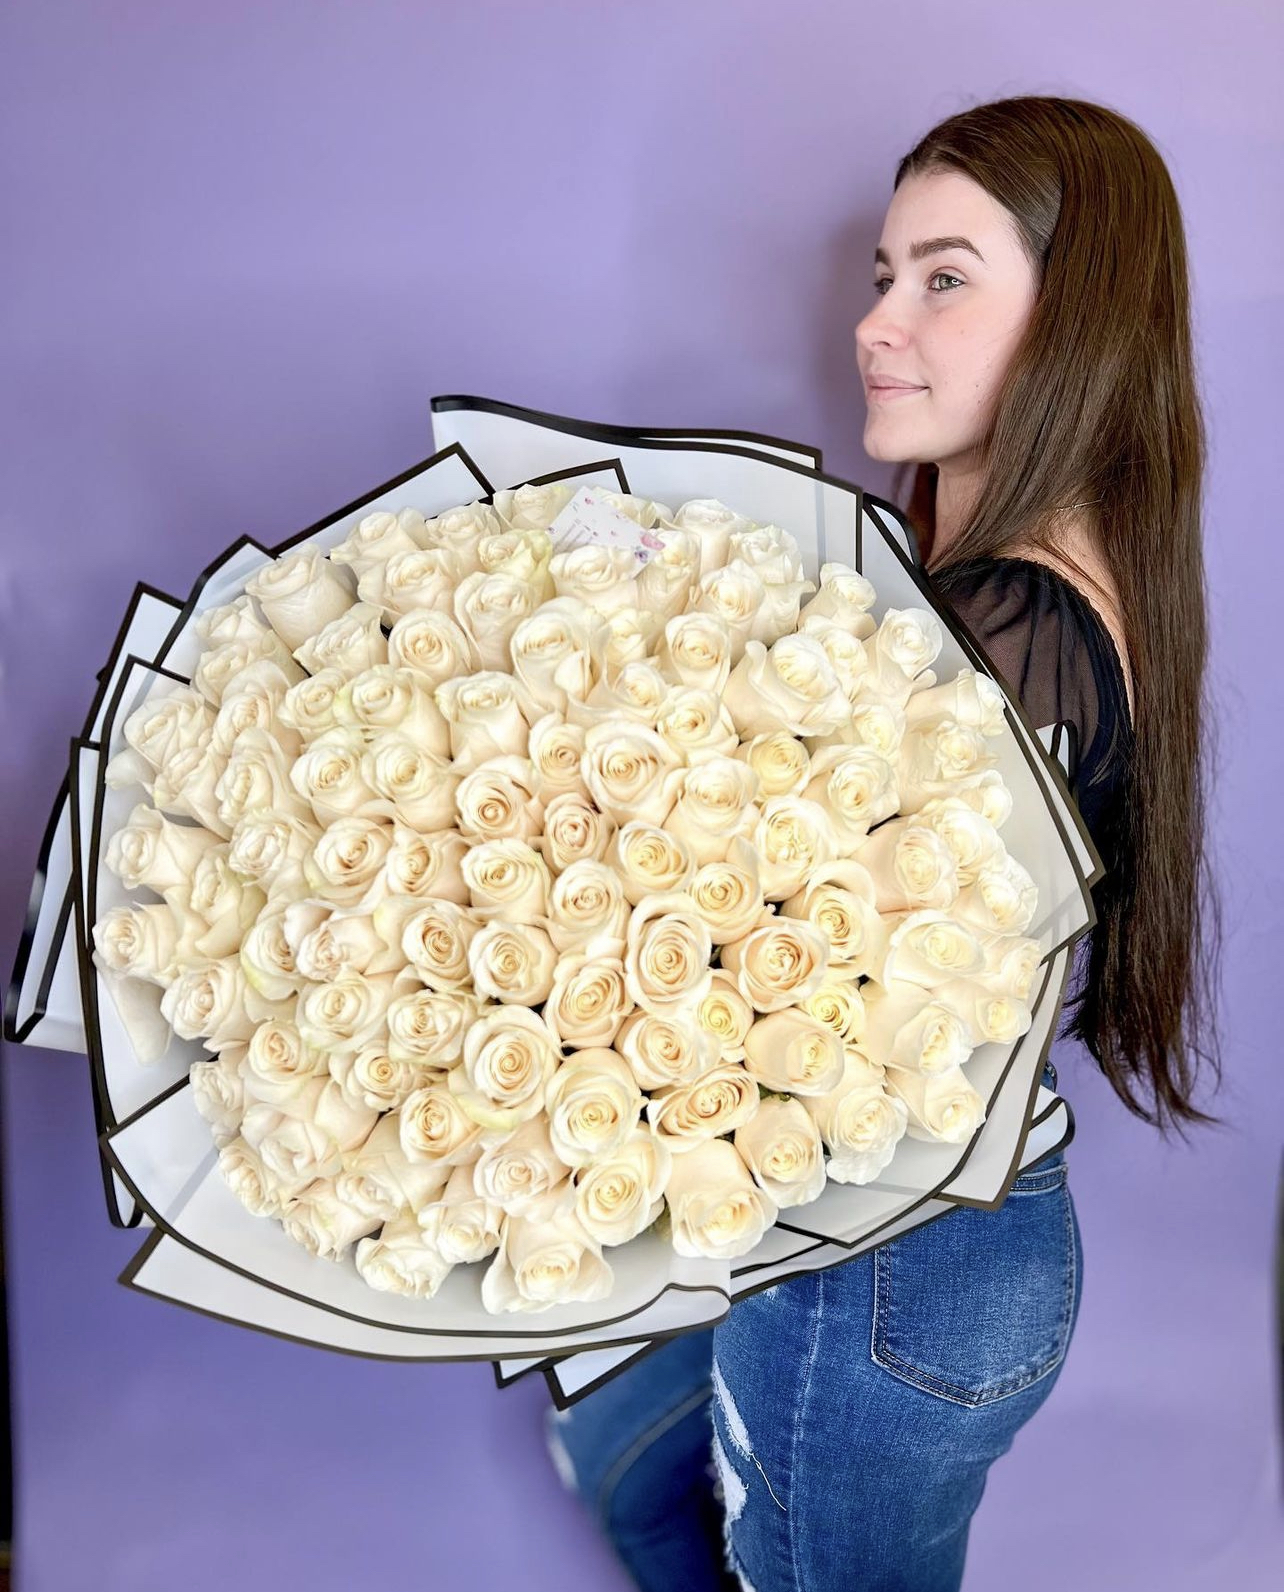 100 White Rose Bouquet